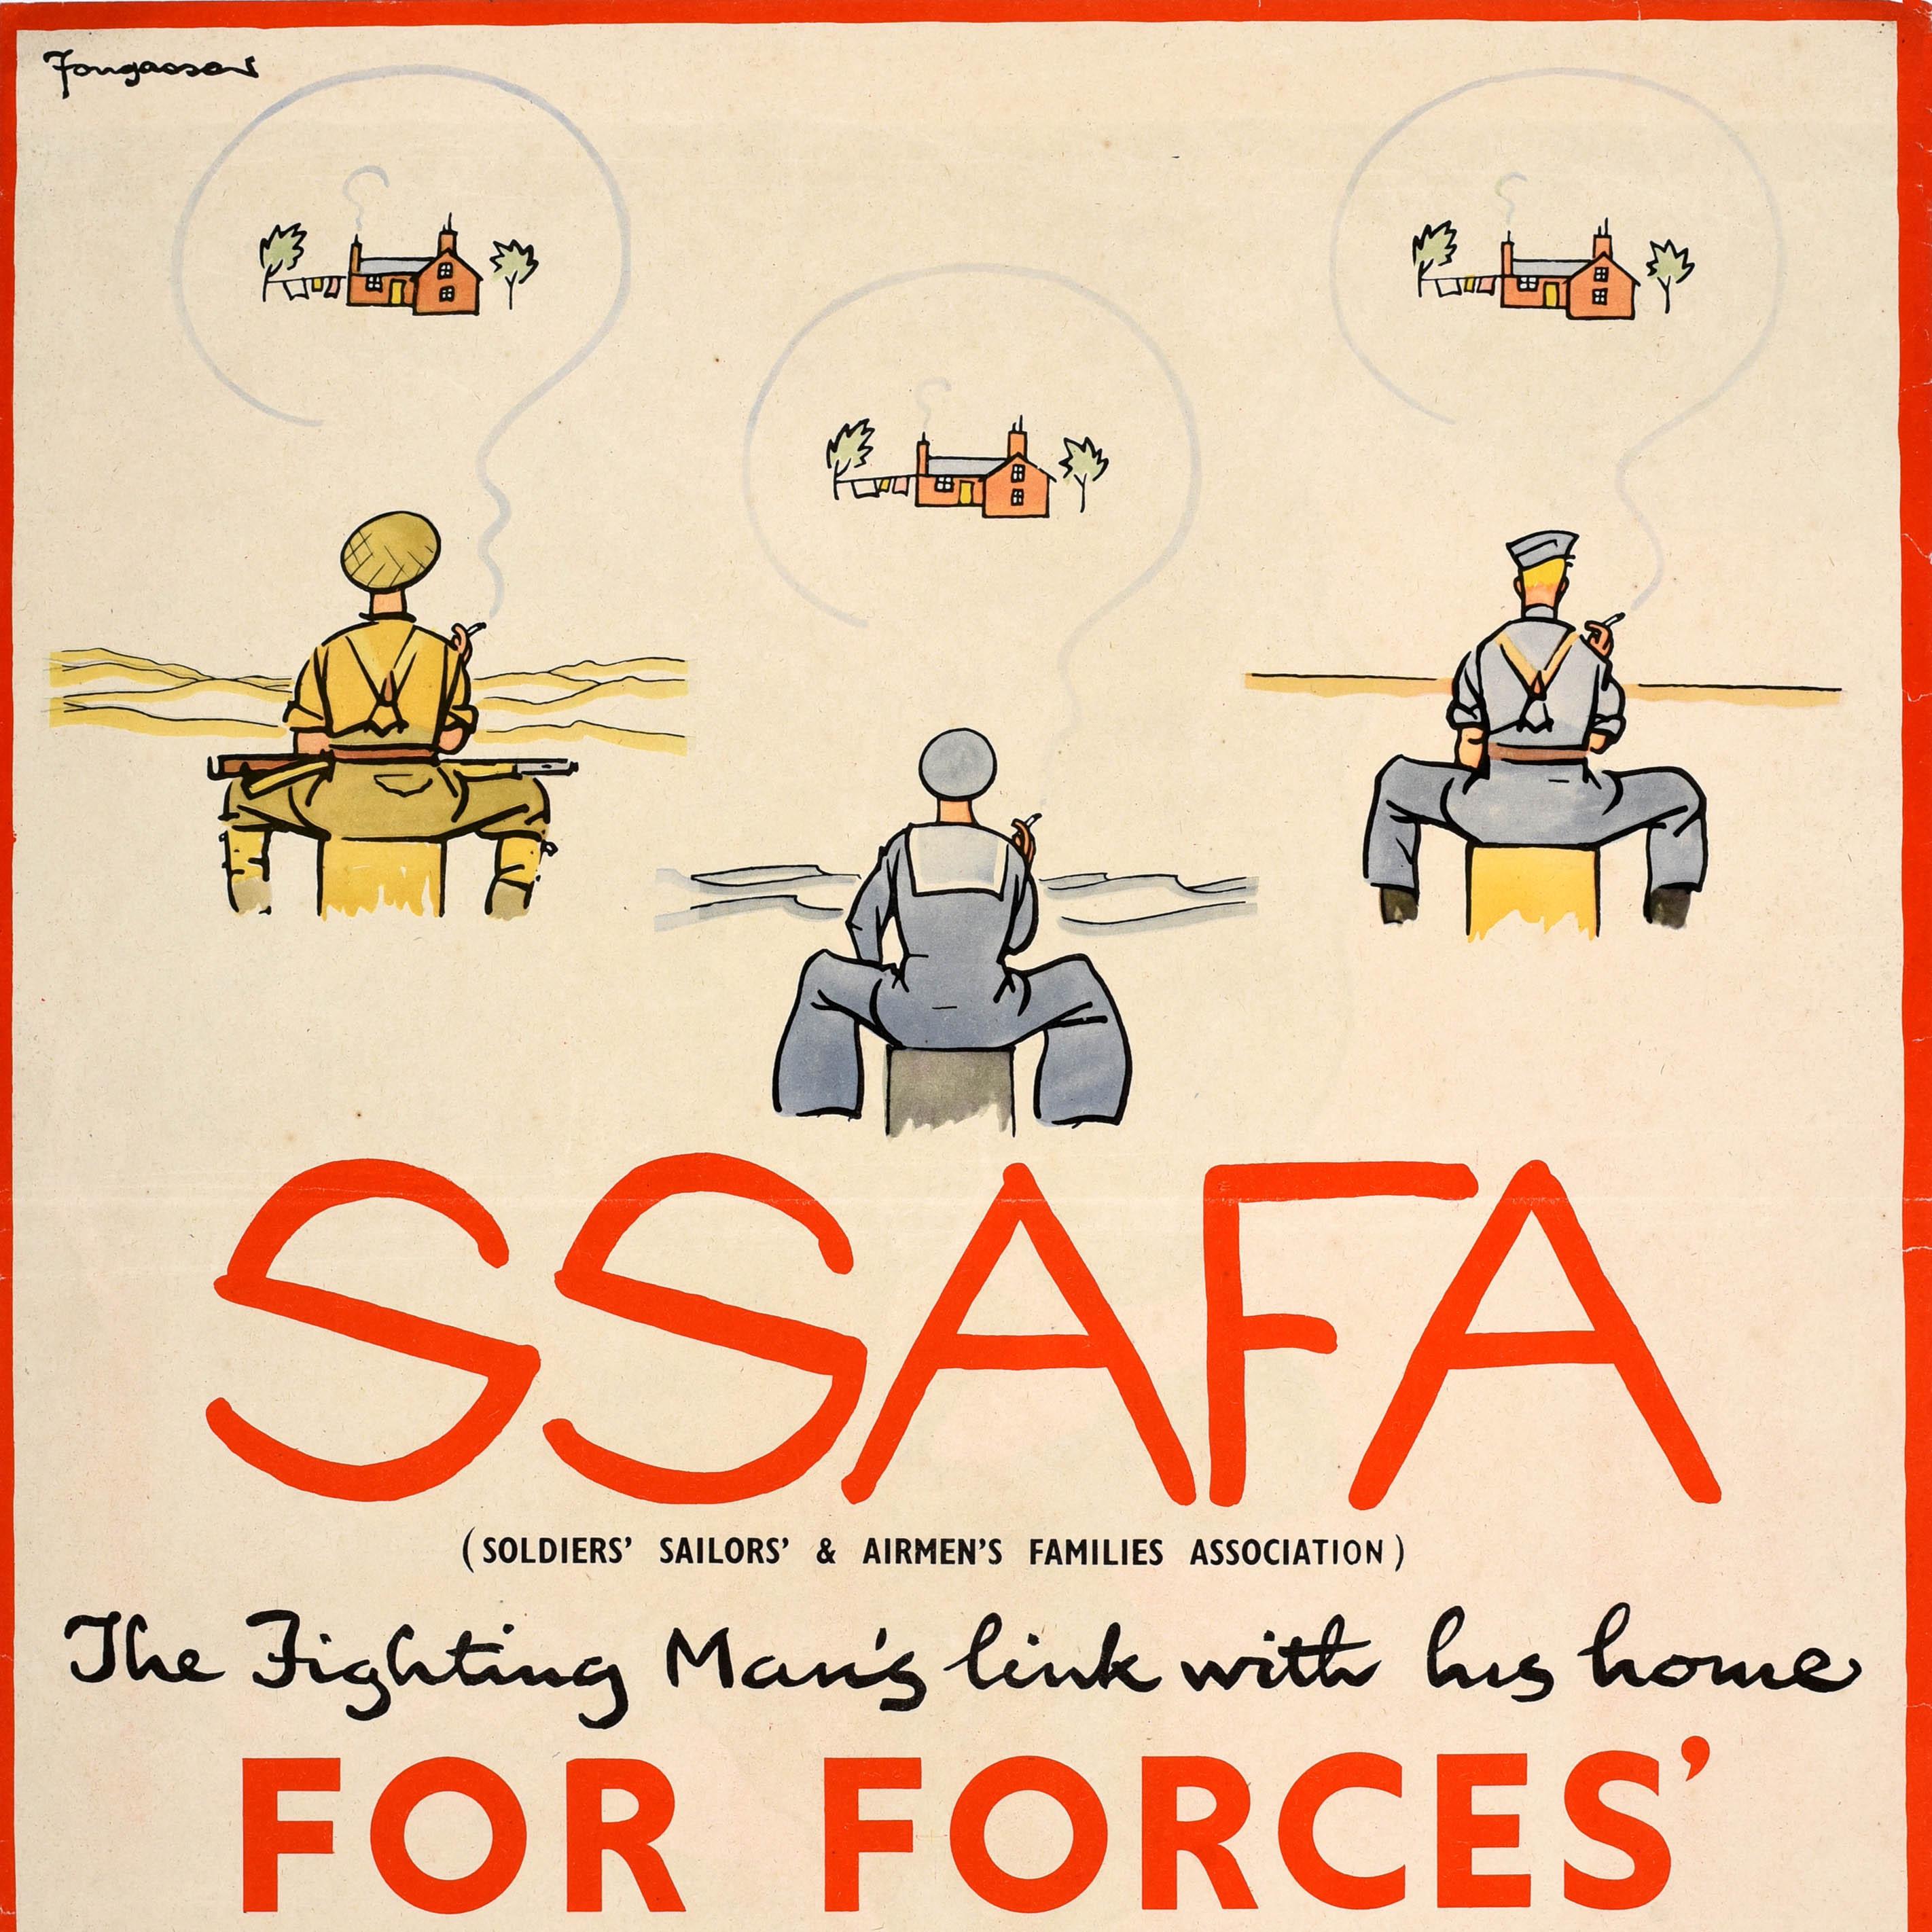 Original vintage World War Two poster - SSAFA Soldiers' Sailors' & Airmen's Families Association - The Fighting Man's link with his home. For Forces' Families Flag Day, September 3rd - featuring an illustration of a soldier, sailor and airman